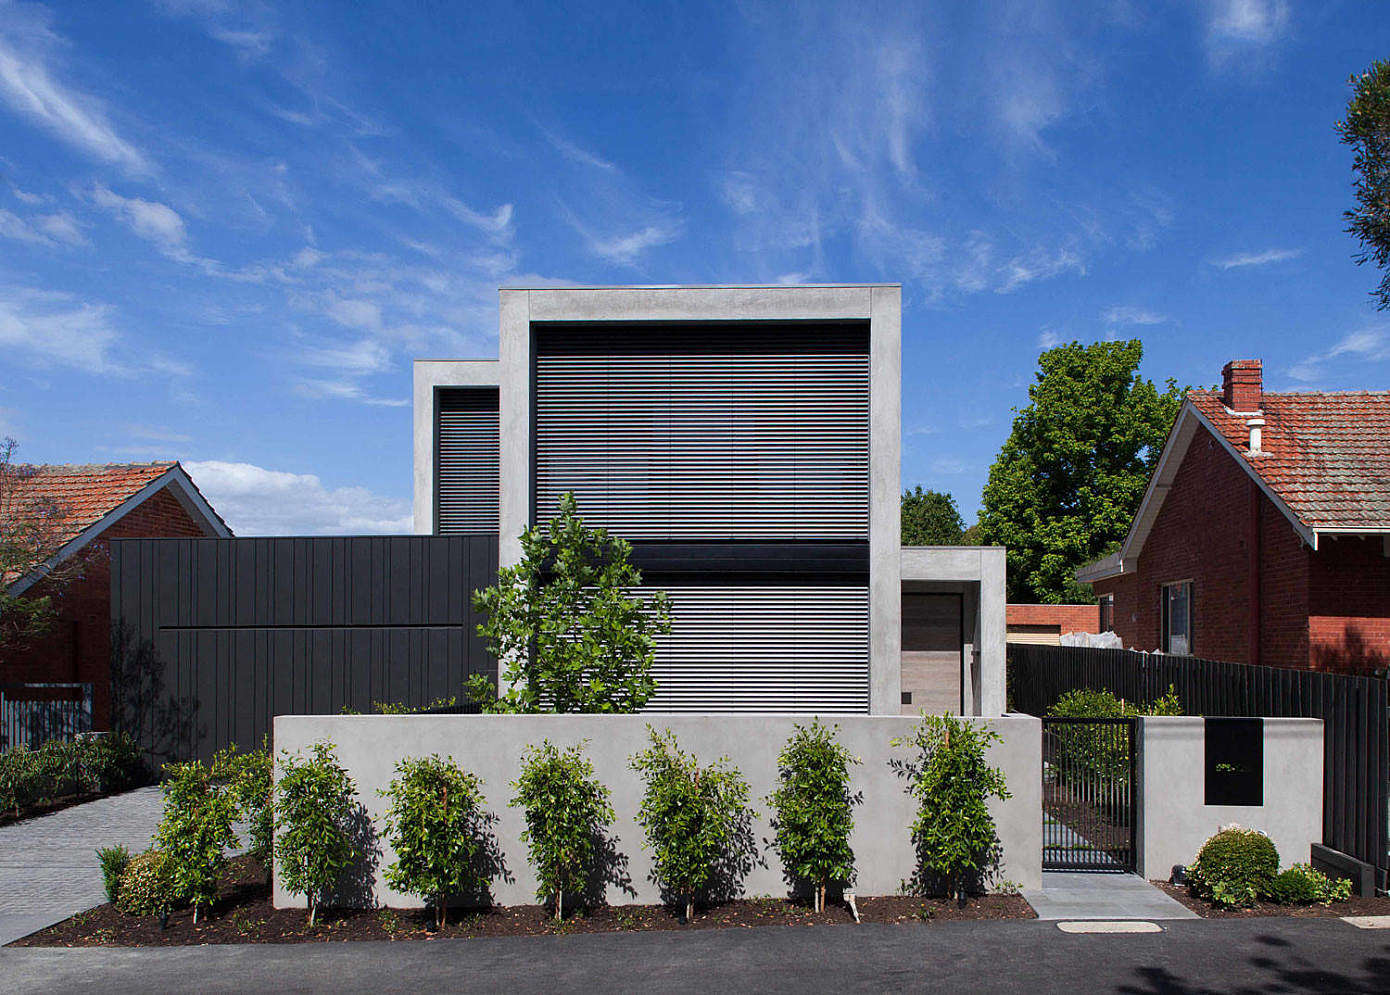 Malvern House by Manchen Projects